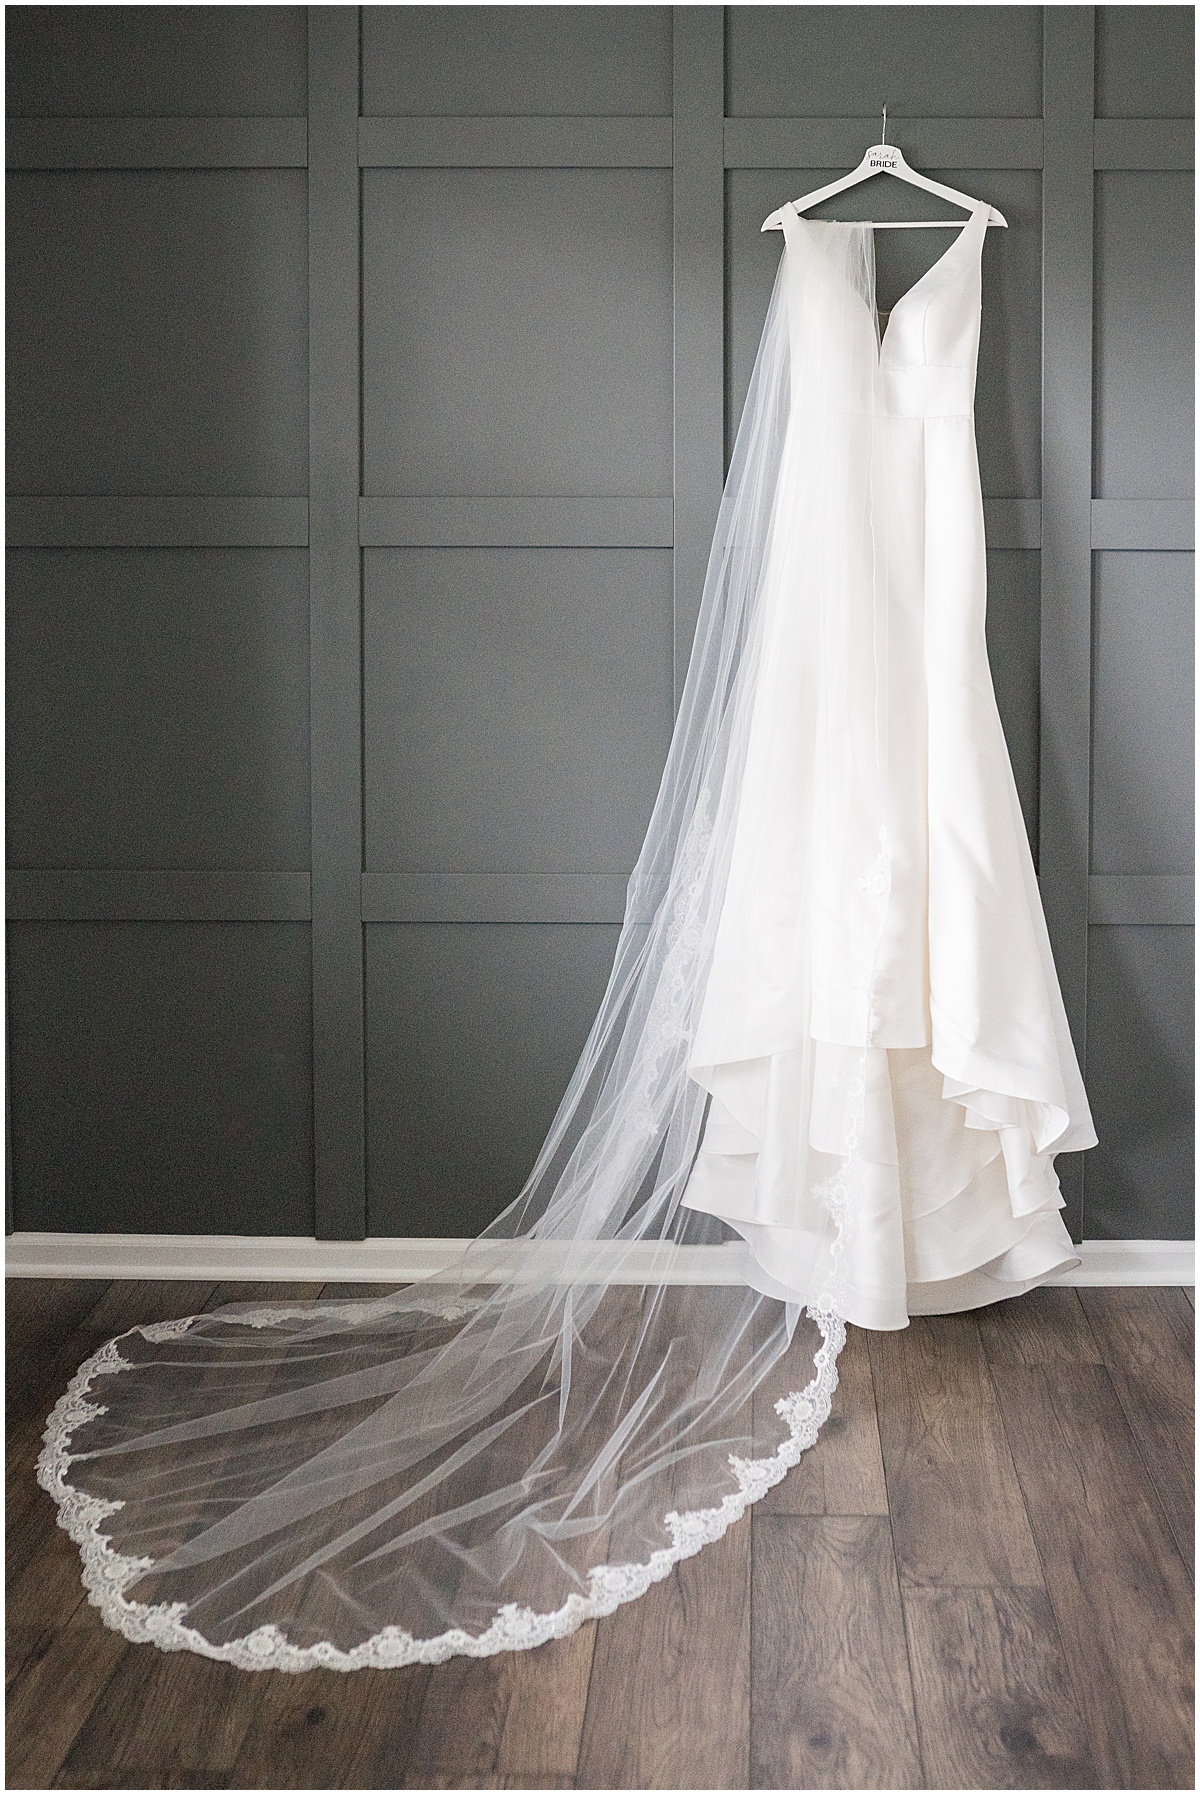 Dress hanging with lace veil for Lighthouse Restaurant wedding in Cedar Lake, Indiana